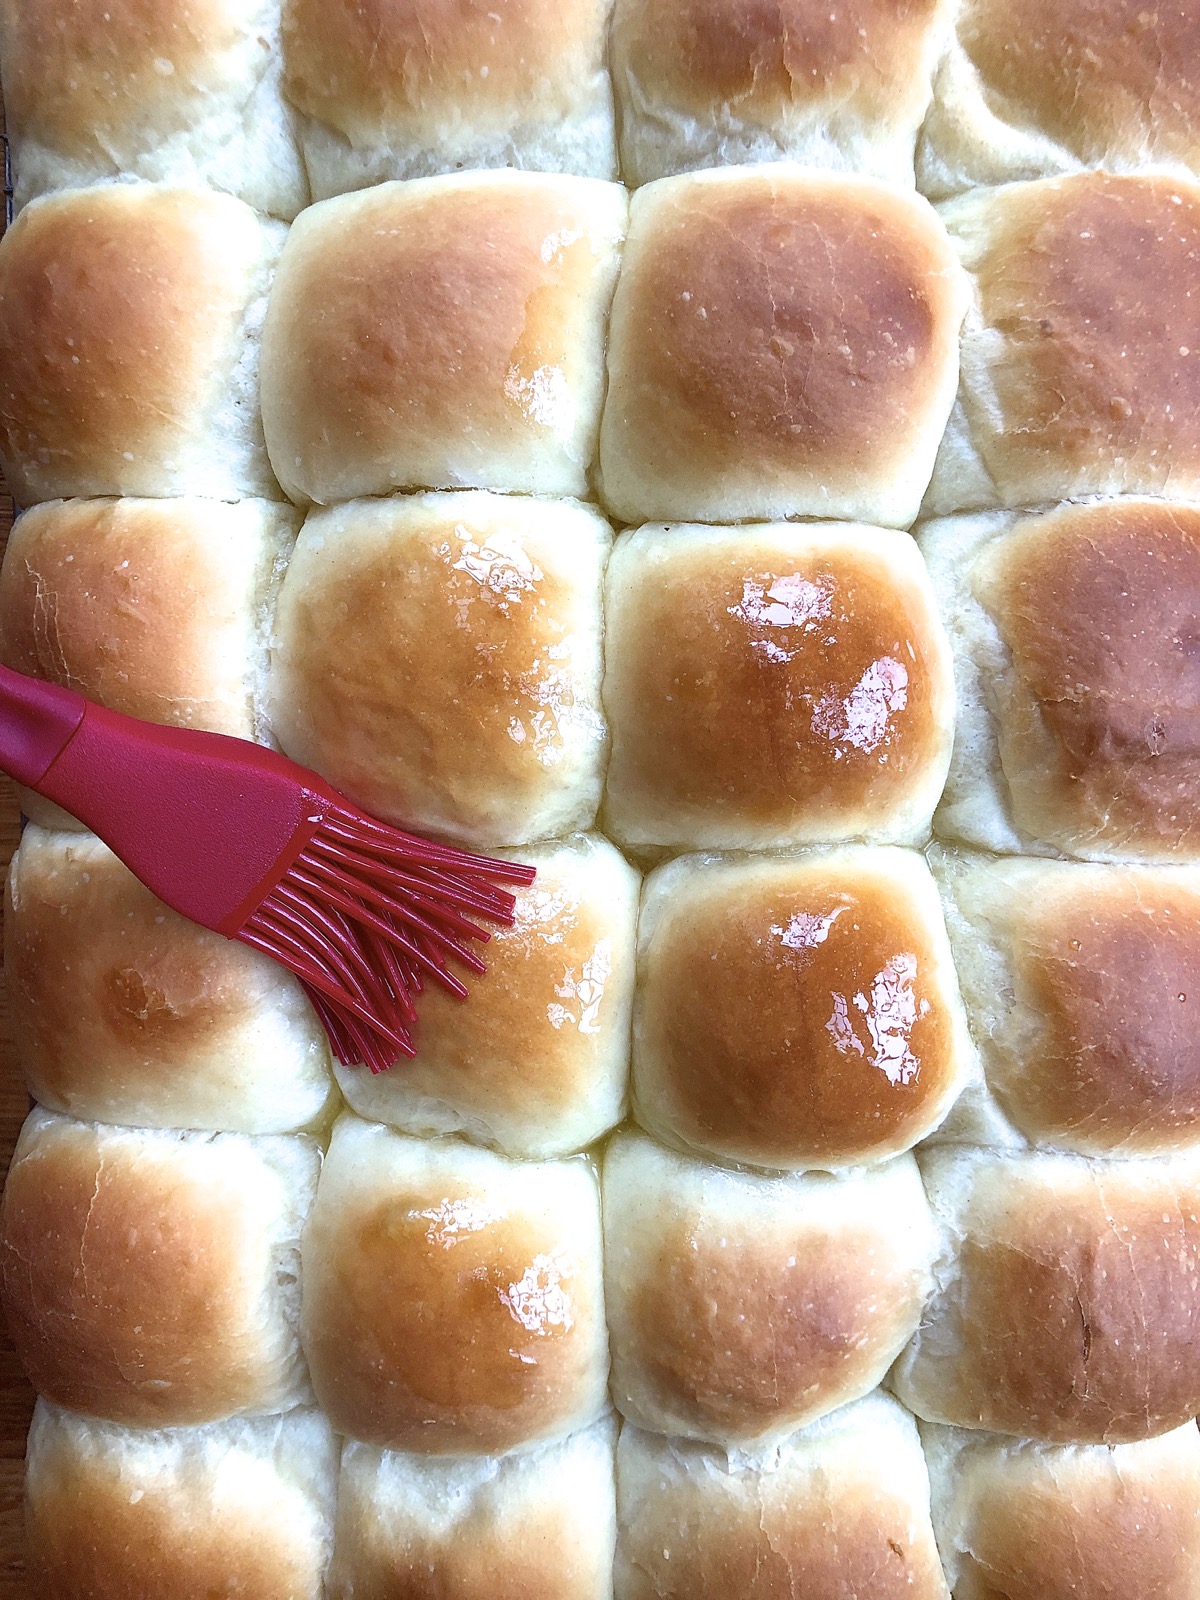 Amish Dinner Rolls hot from the oven, being brushed with butter.